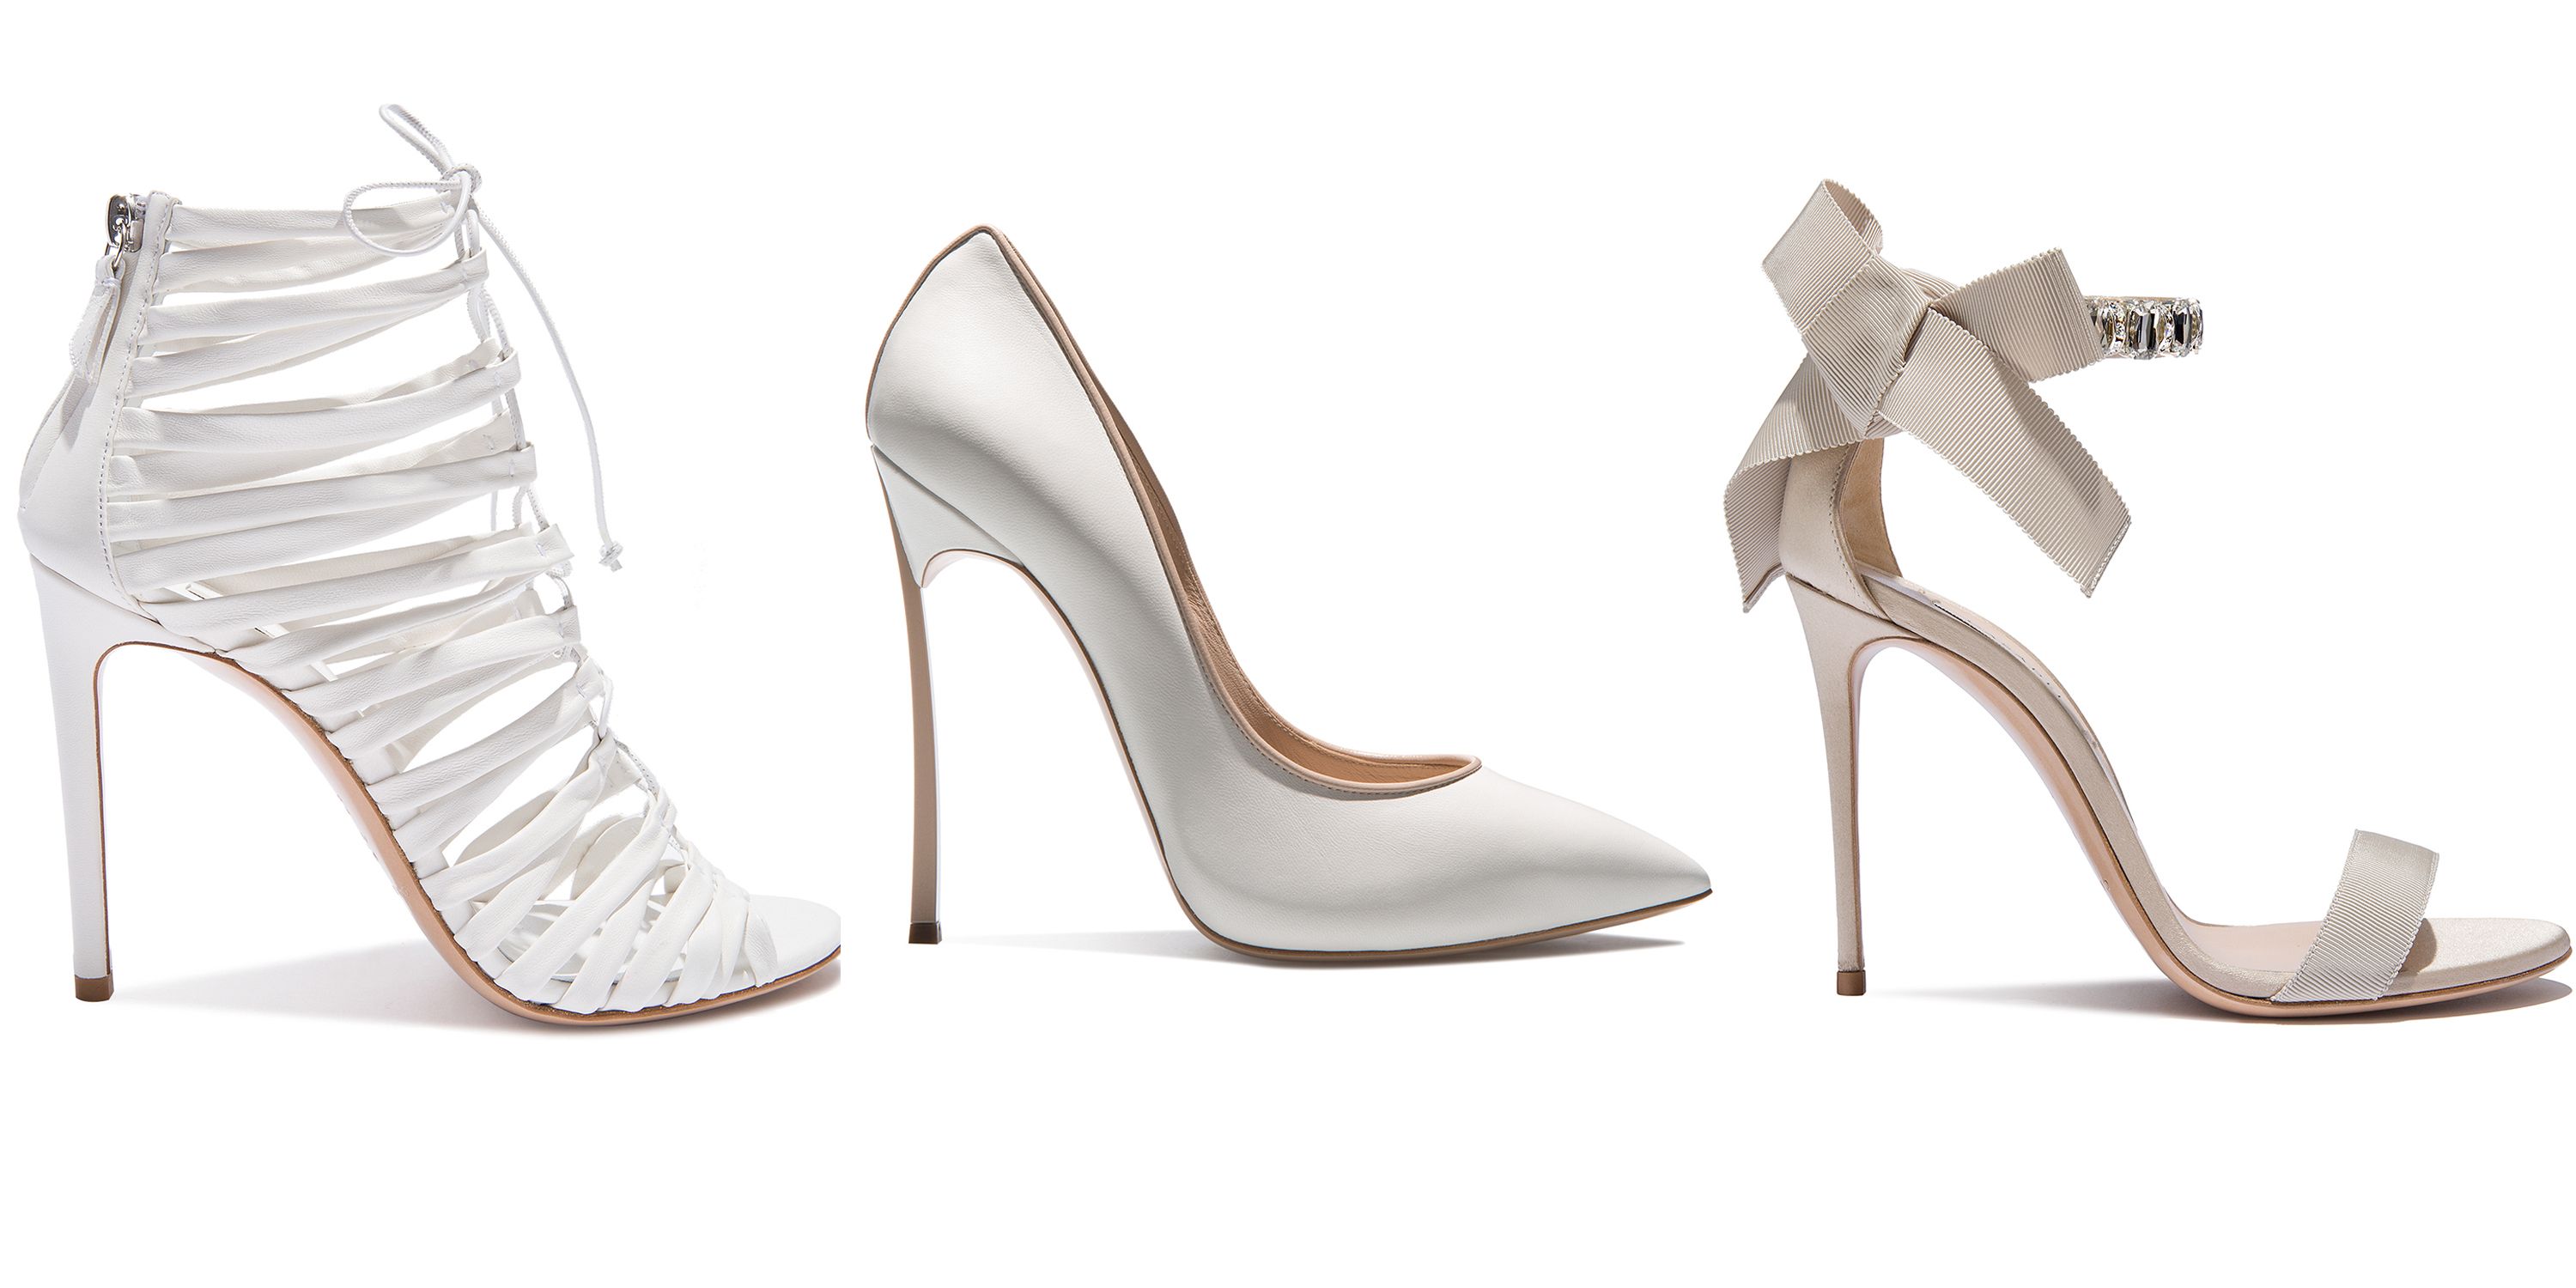 See Every Style from Casadei's New Bridal Capsule Collection - Casadei Launches Bridal Collection Available for Purchase Online